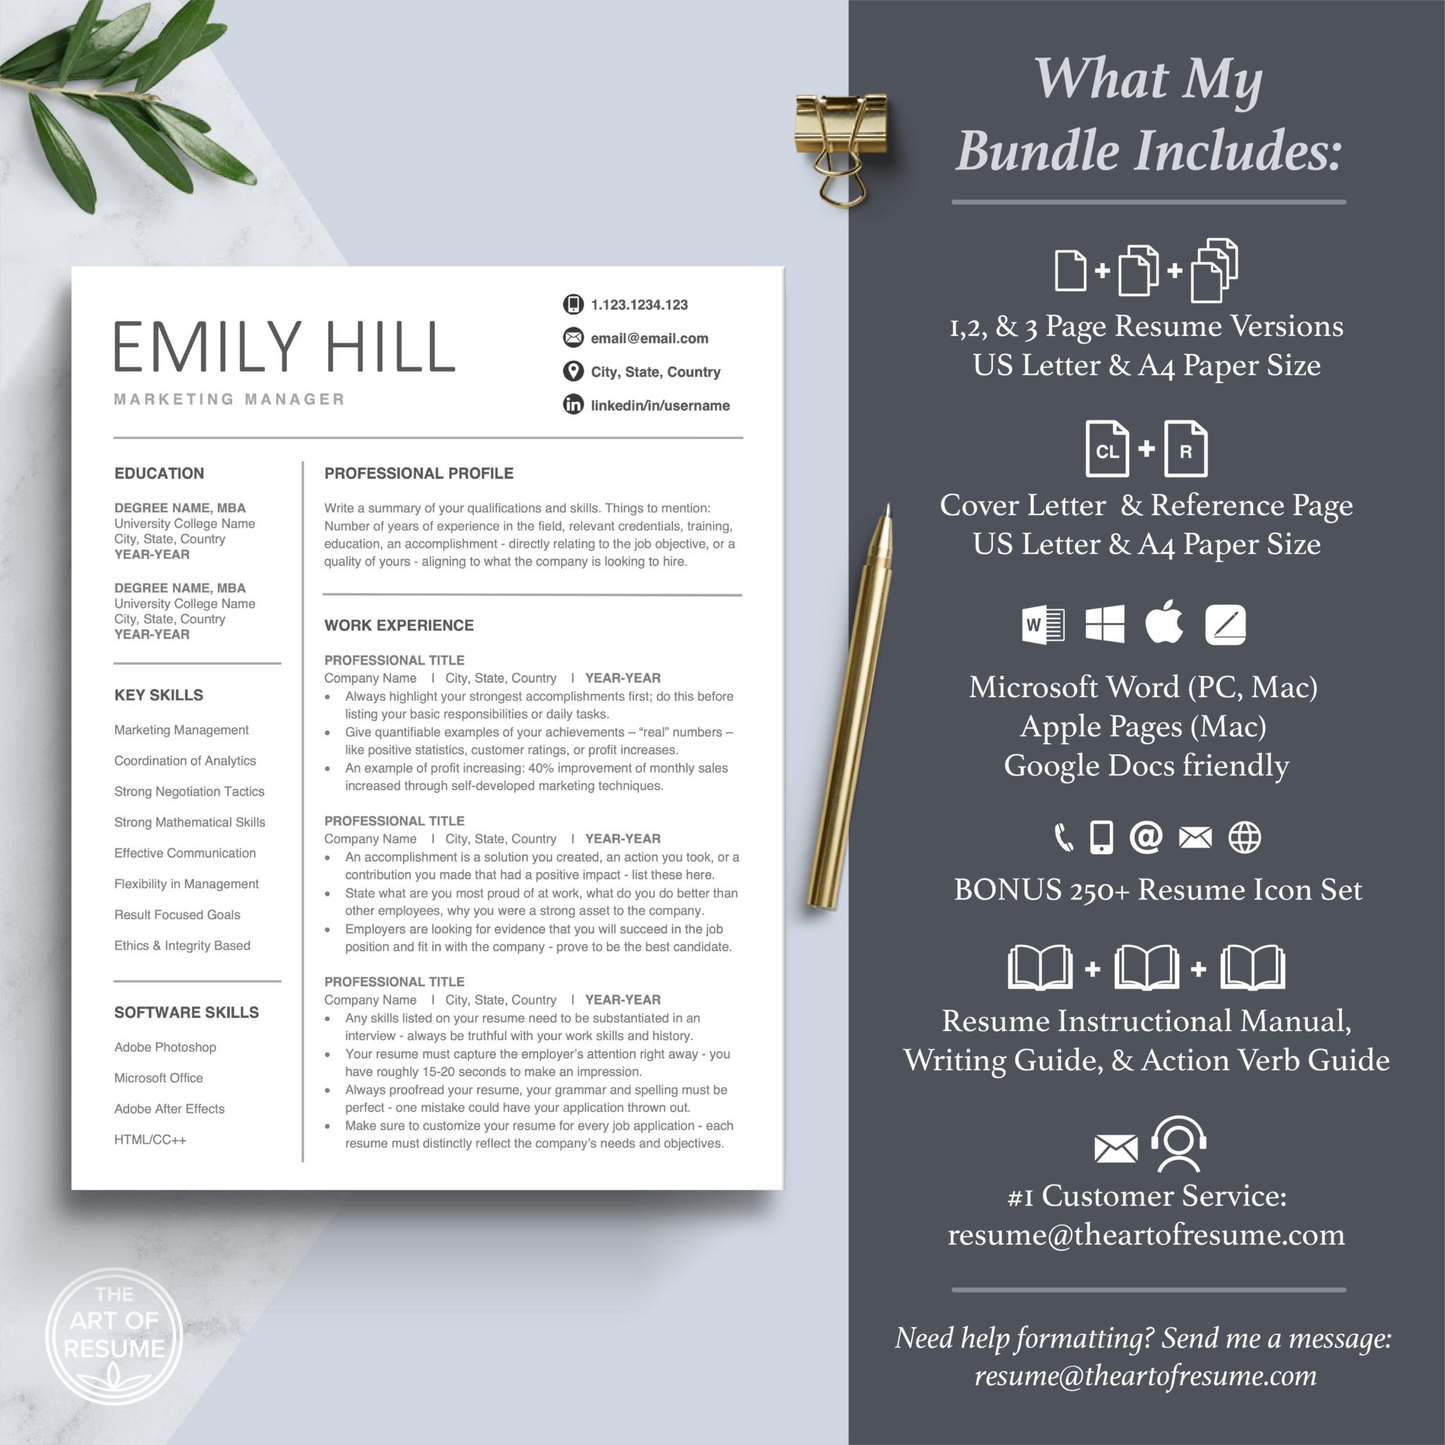 Professional Resume Bundle includes 3 Resume Designs, Cover Letter, Reference Page, Word, Pages, Google Docs, Mac, PC, A4 Paper, US Letter size, The Art of Resume Writing Guide, Resume Instructional Manual, Action Verb Guides, Best Customer Service, Free 250 Resume Icons